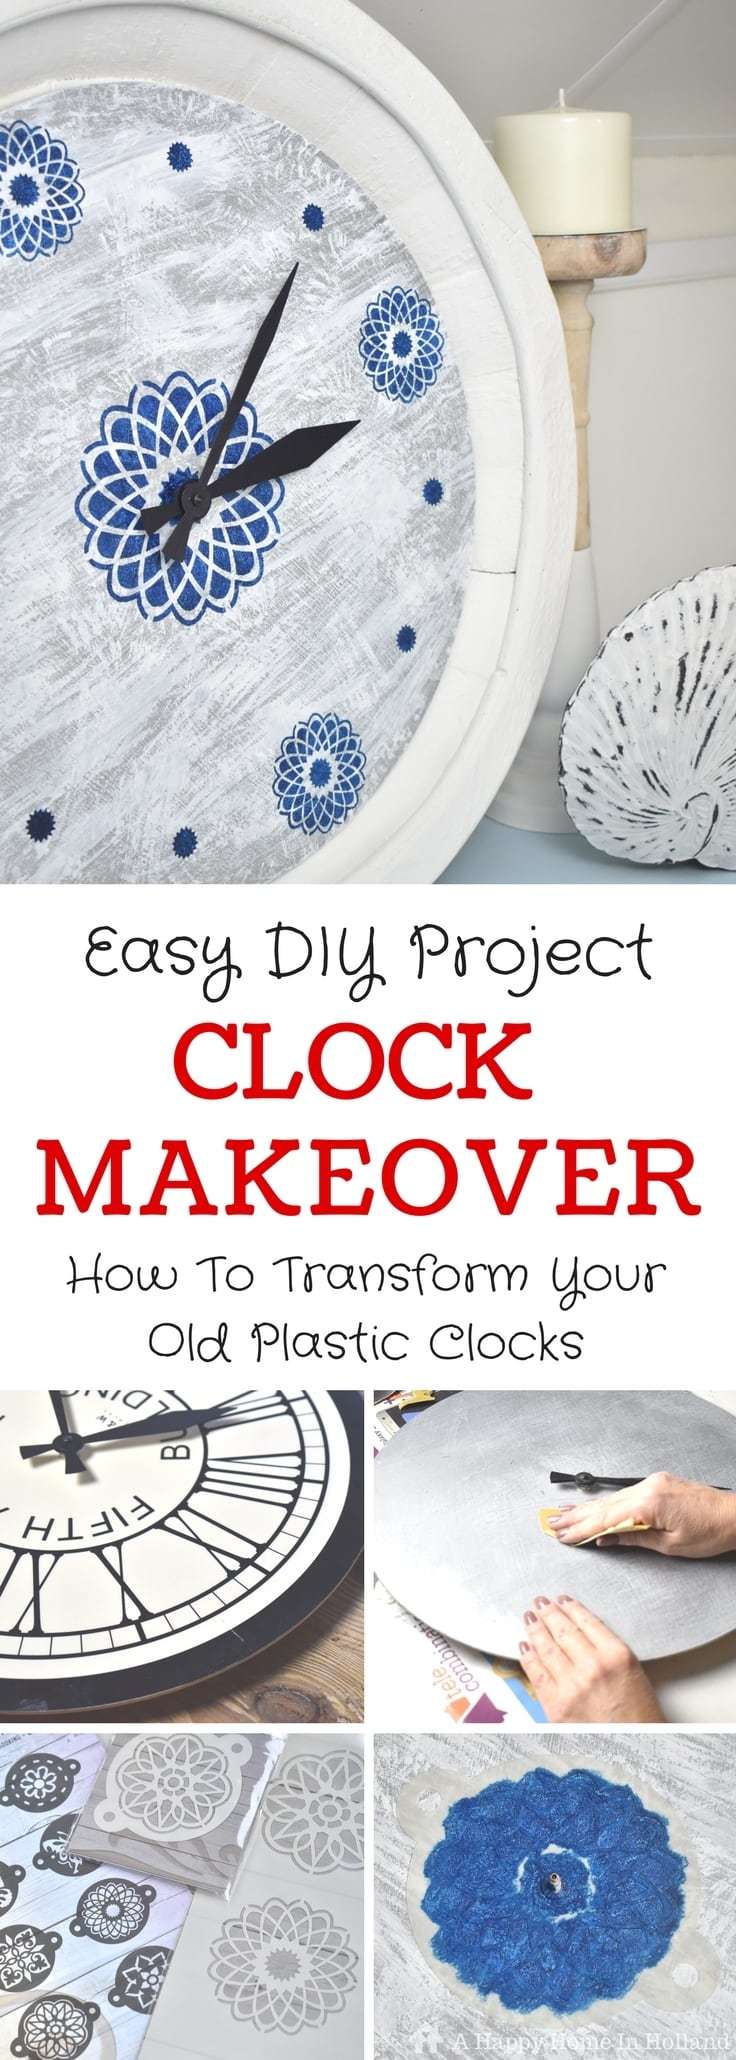 DIY Upcycled Clock: Quick & Easy Stencilling Project Idea To Make Over Old Thrift Store Clocks In To Modern Home Decor Accents